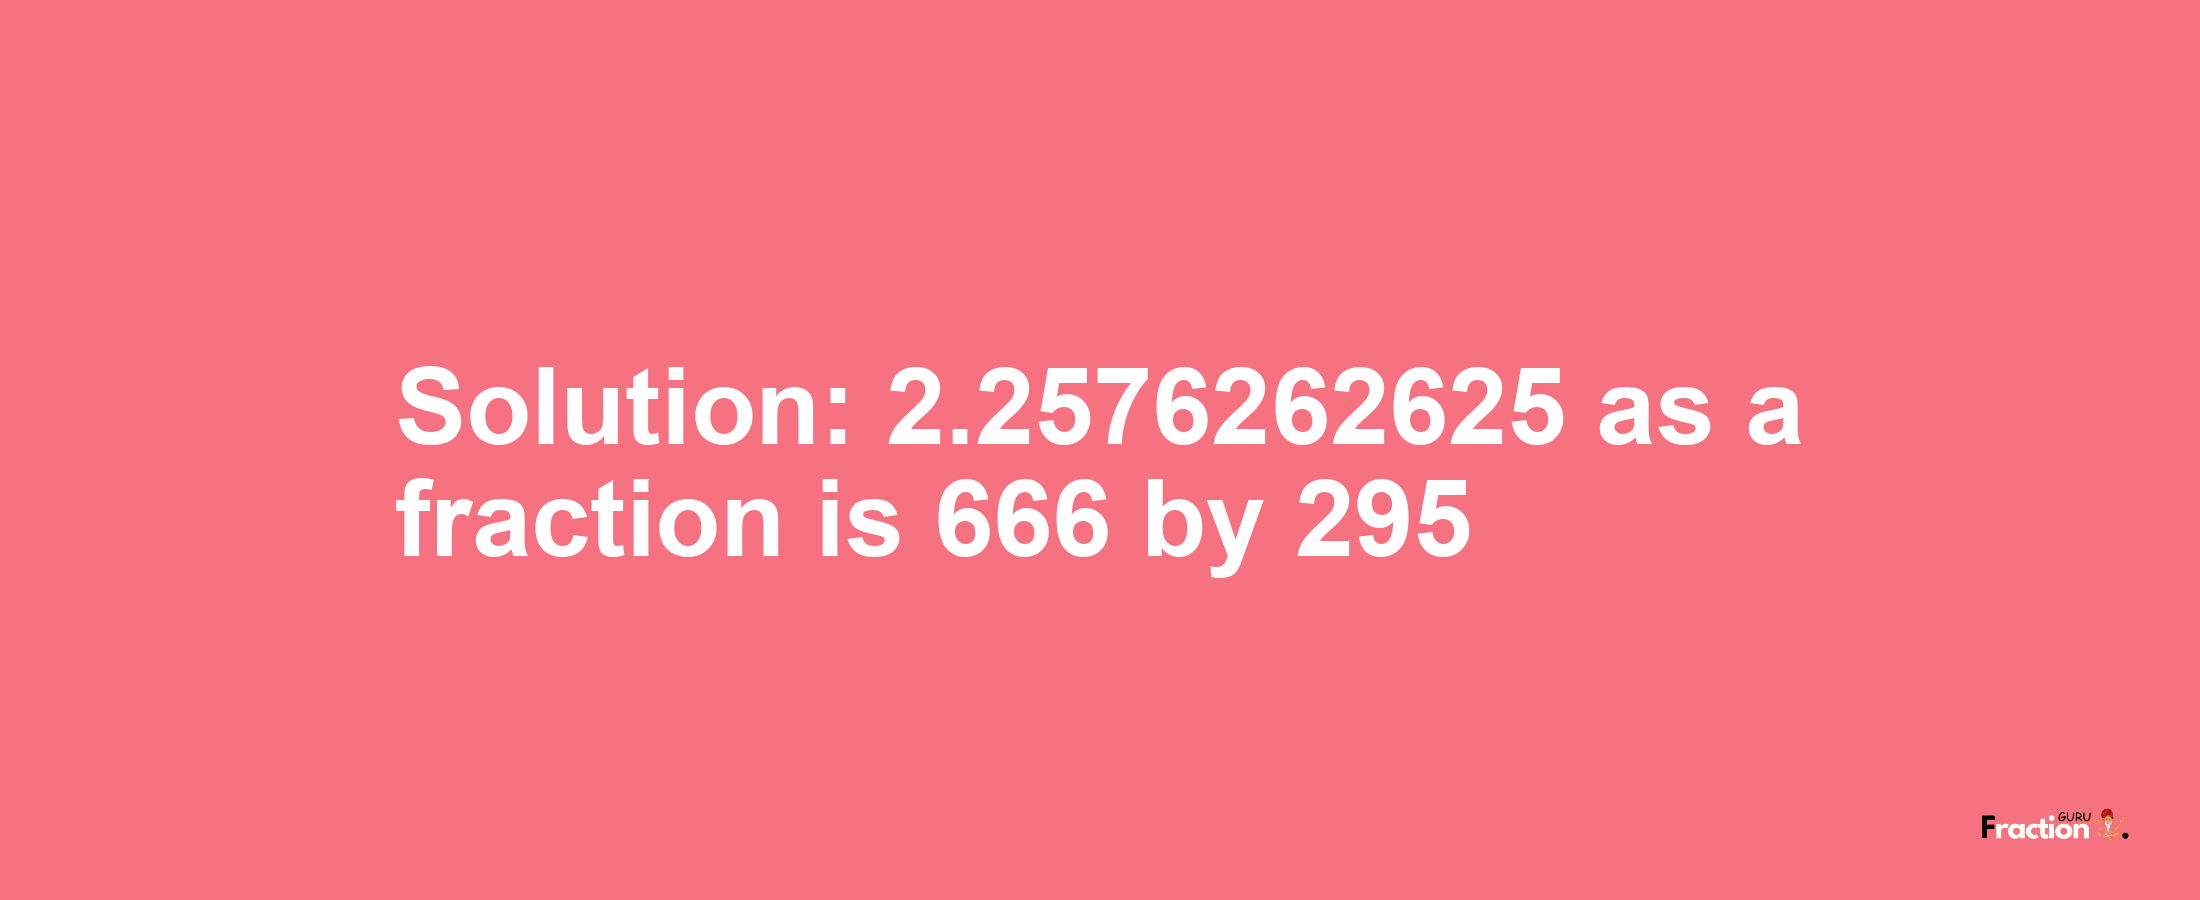 Solution:2.2576262625 as a fraction is 666/295